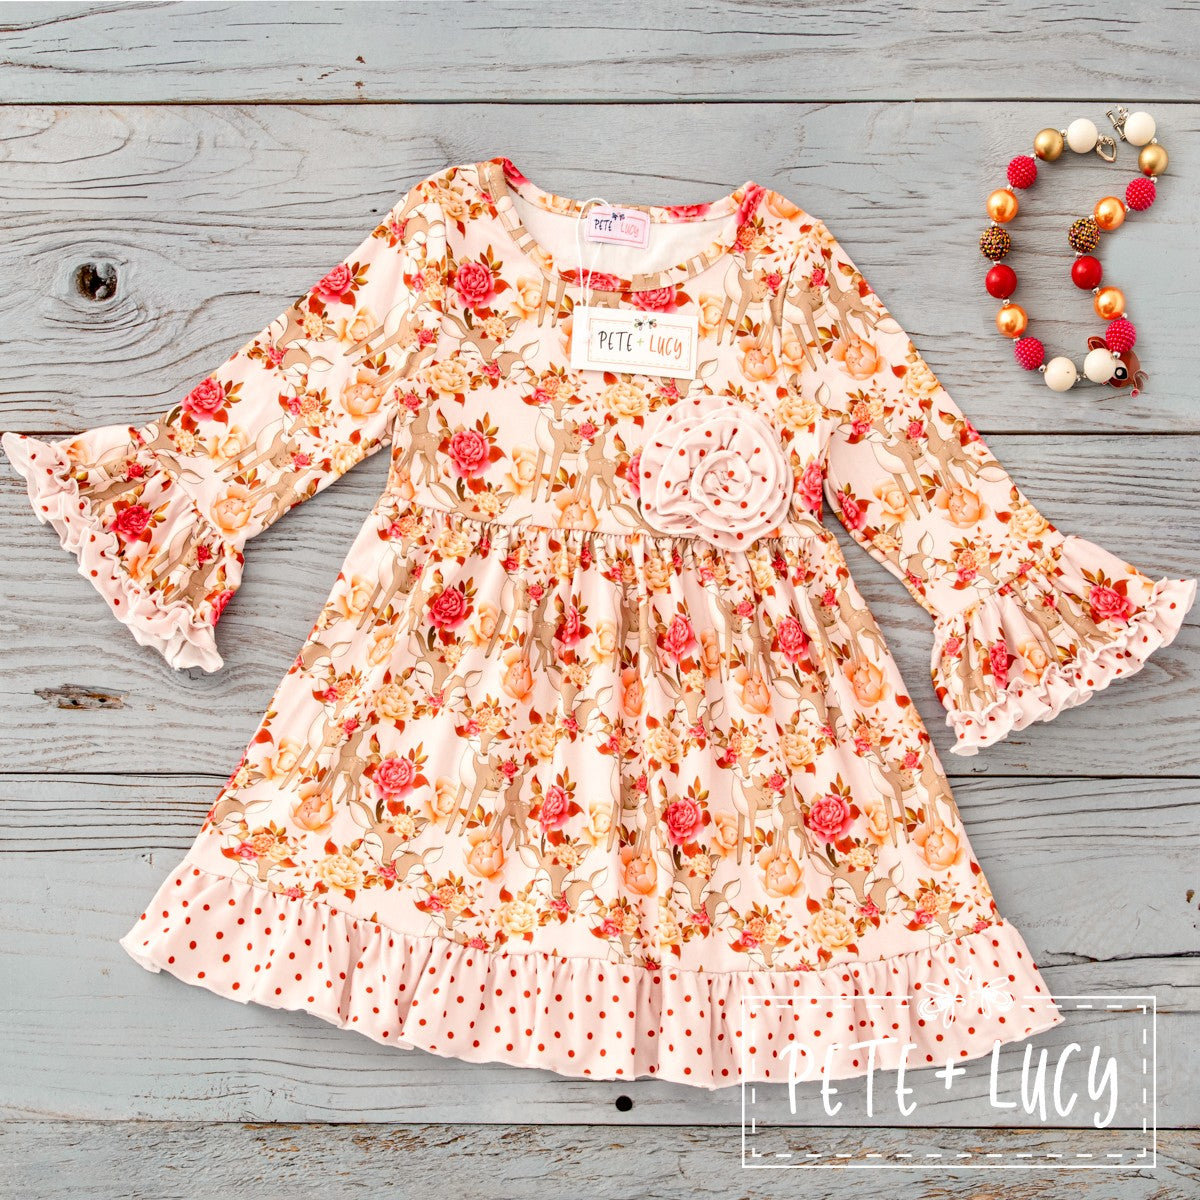 Pete + Lucy 6-12M Deer and Roses Dress